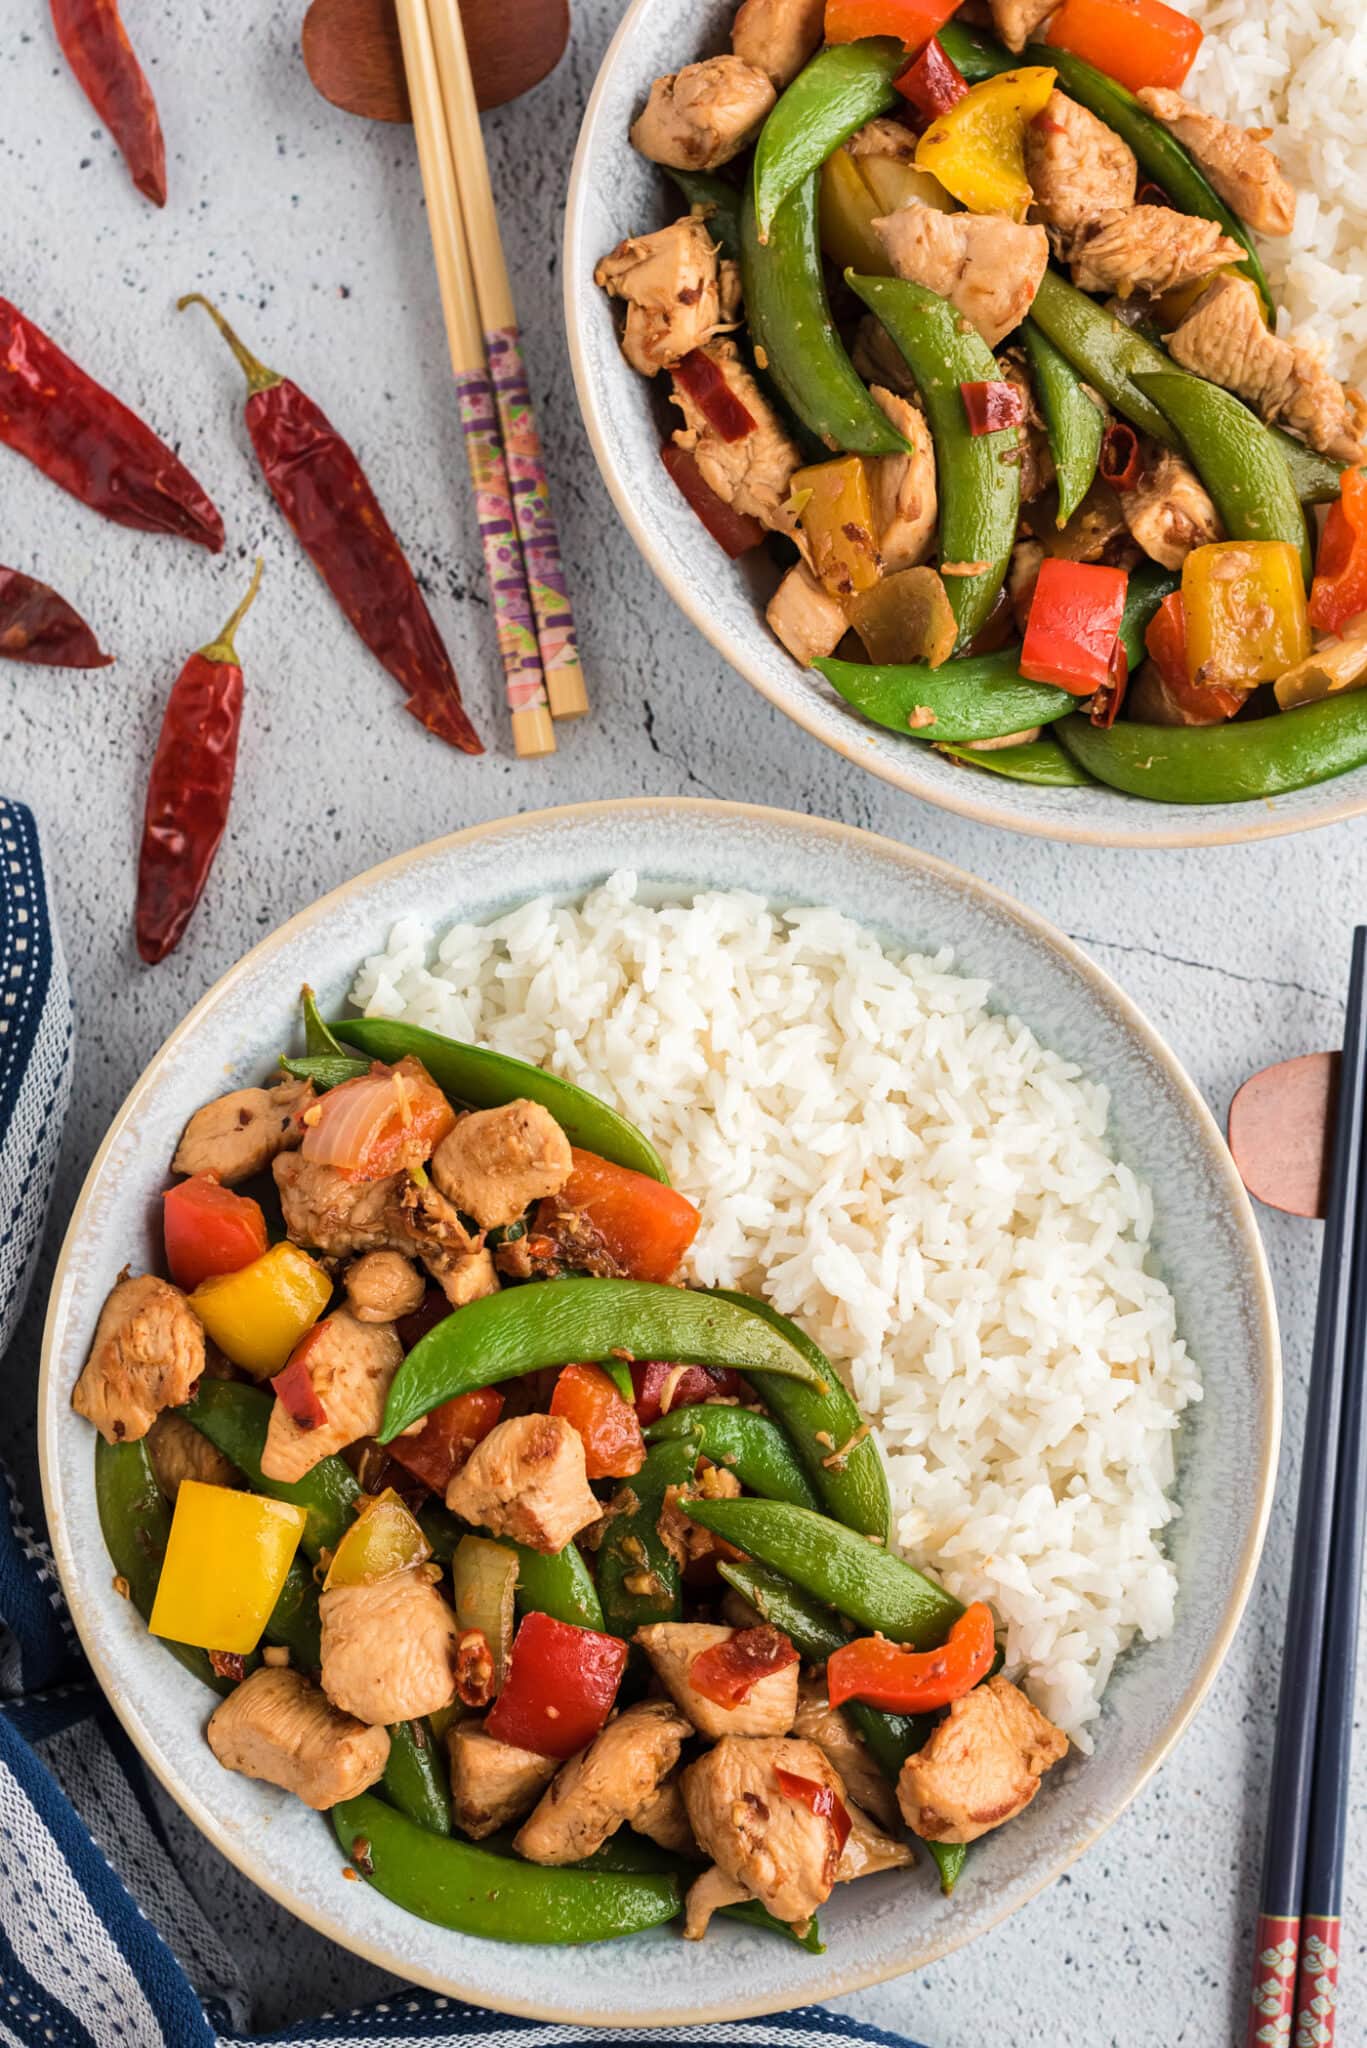 Kung Pao Chicken - Amanda's Cookin' - Chicken & Poultry